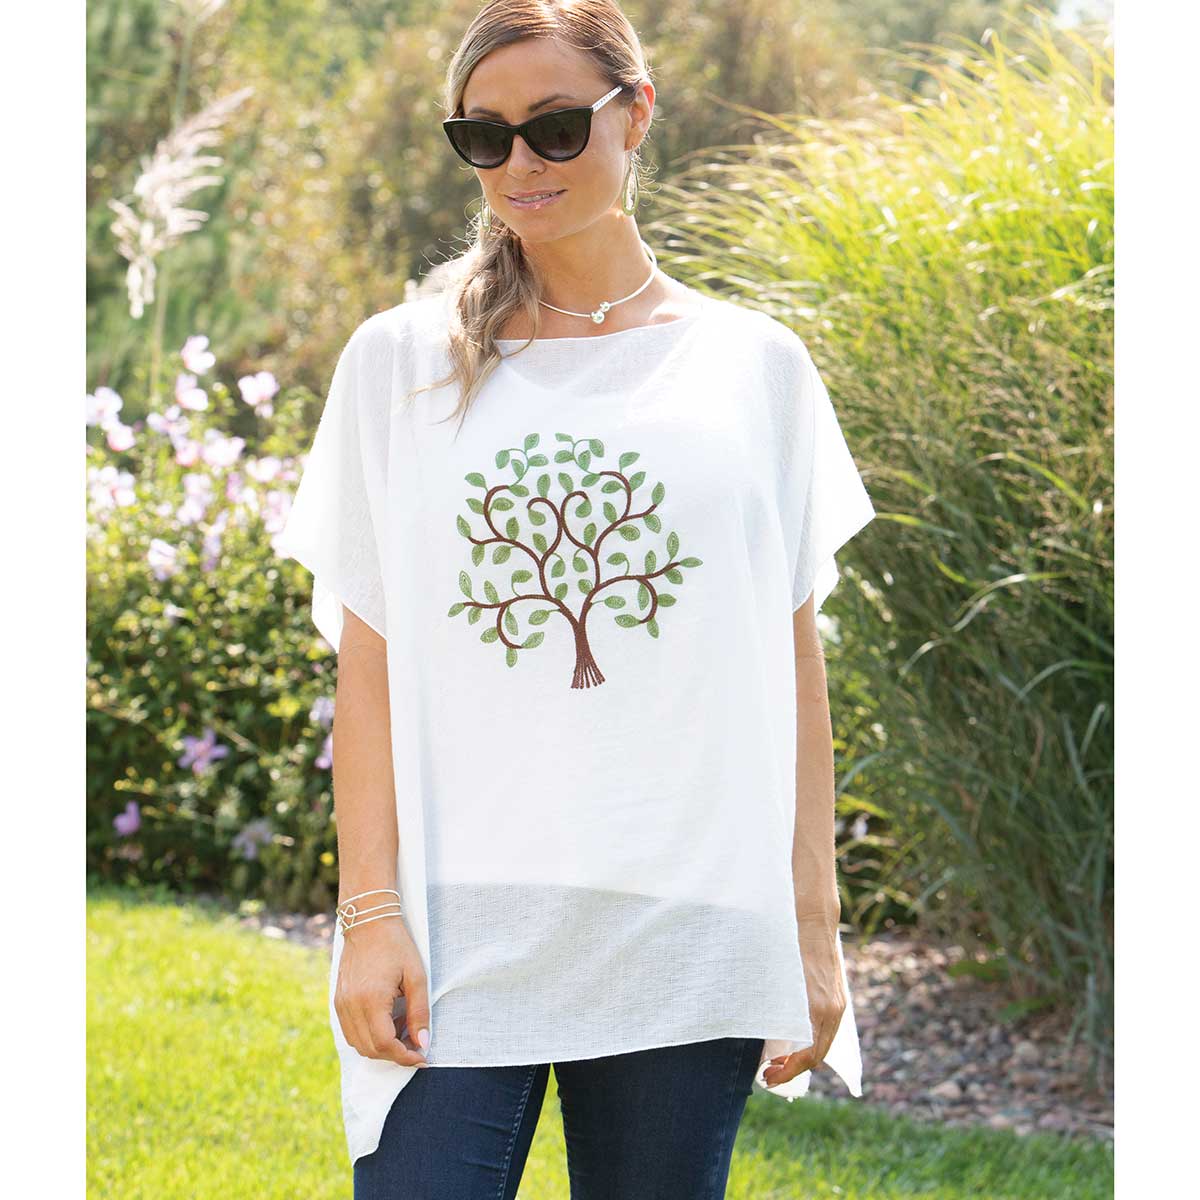 Tunic Embroidered with Laurel Tree 33"x29"